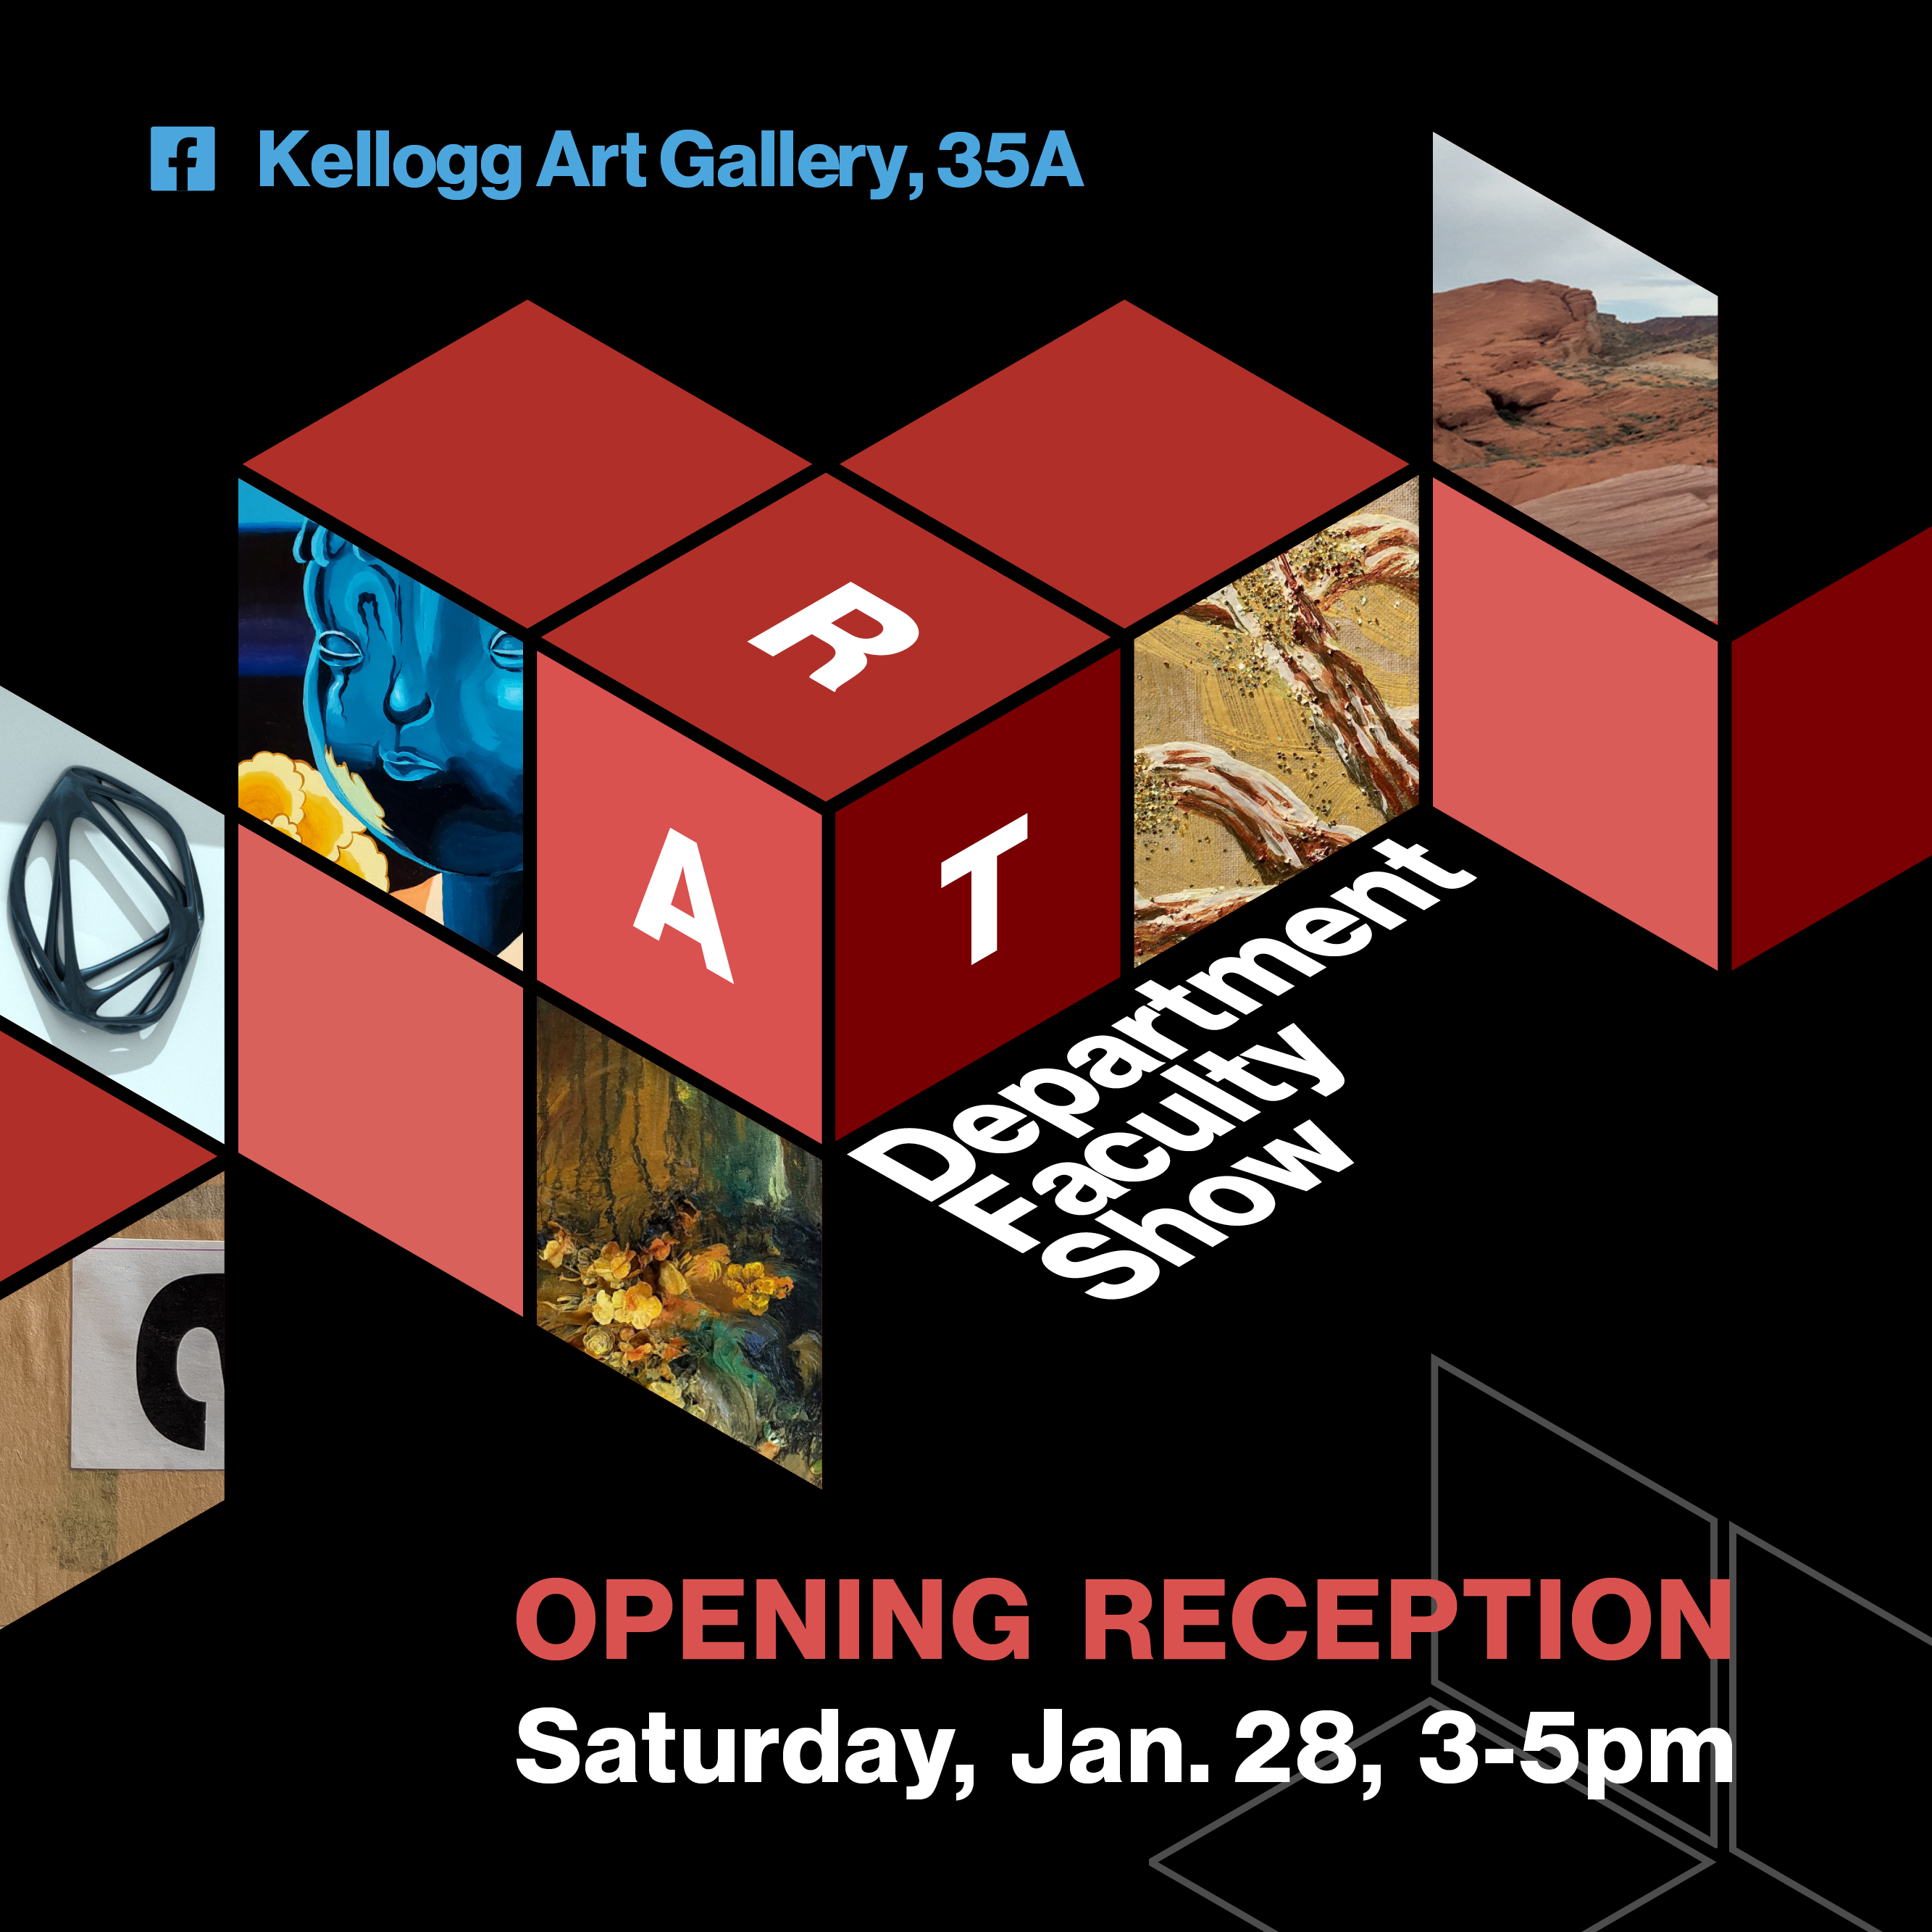 Art Department Faculty Show Opening Reception Saturday, Jan 28, 2023, 3-5pm